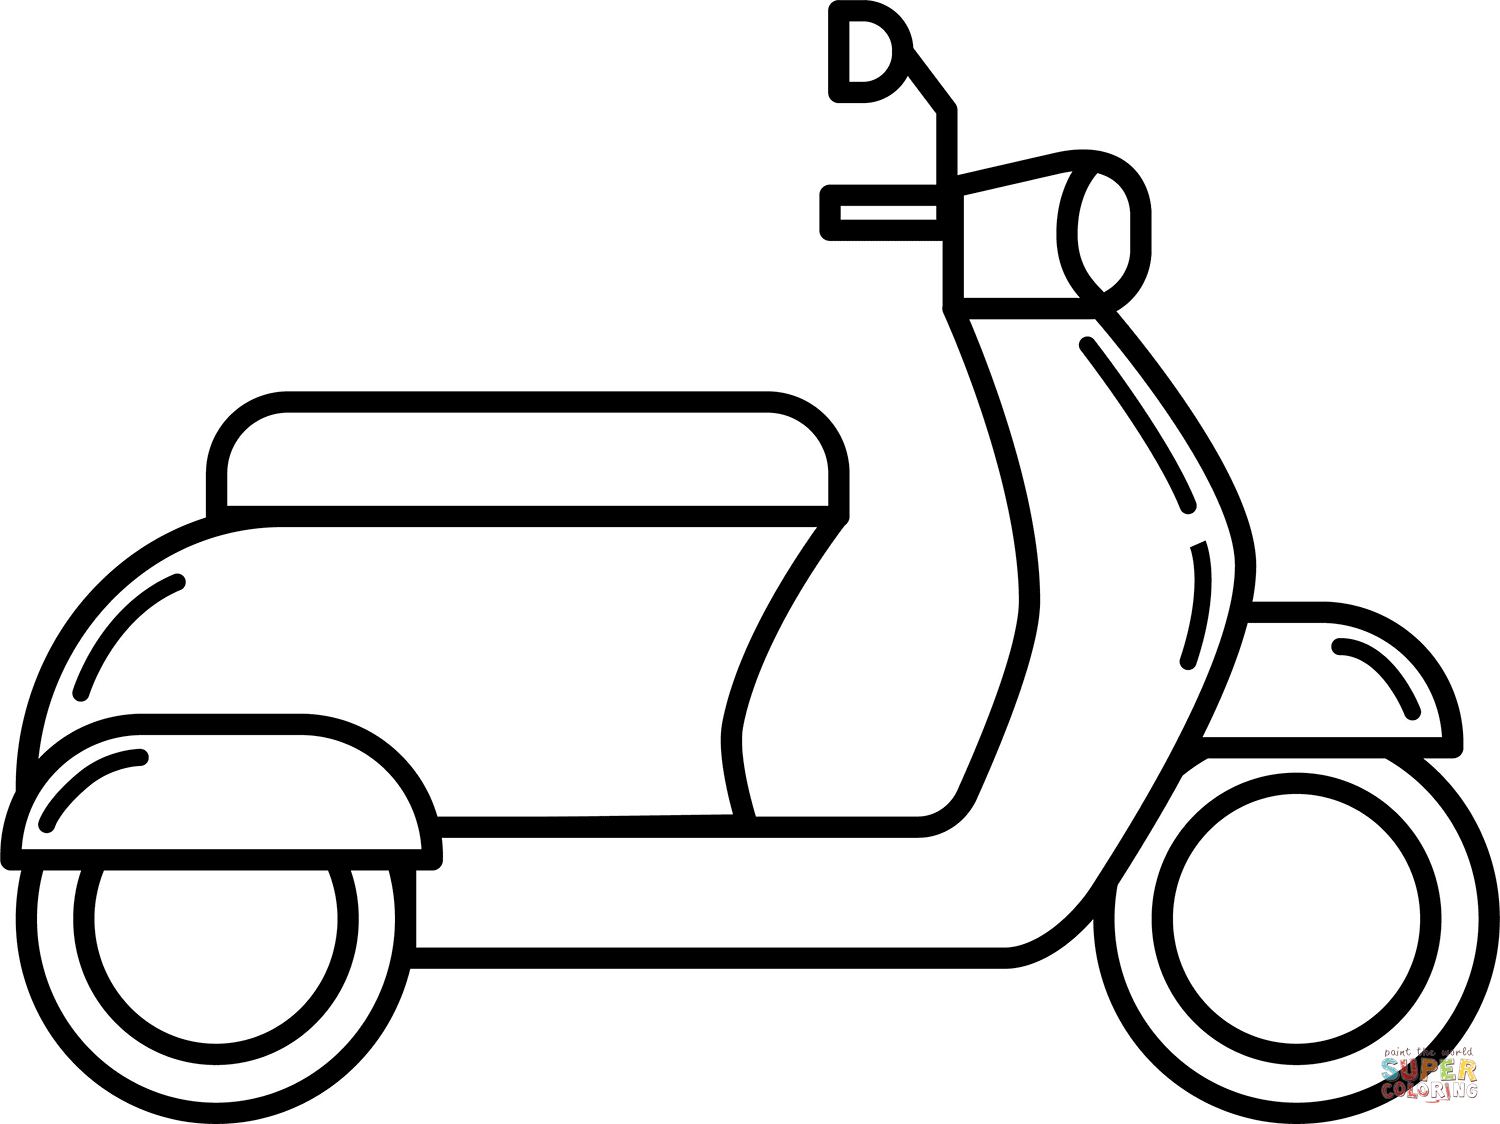 Motor scooter coloring page free printable coloring pages